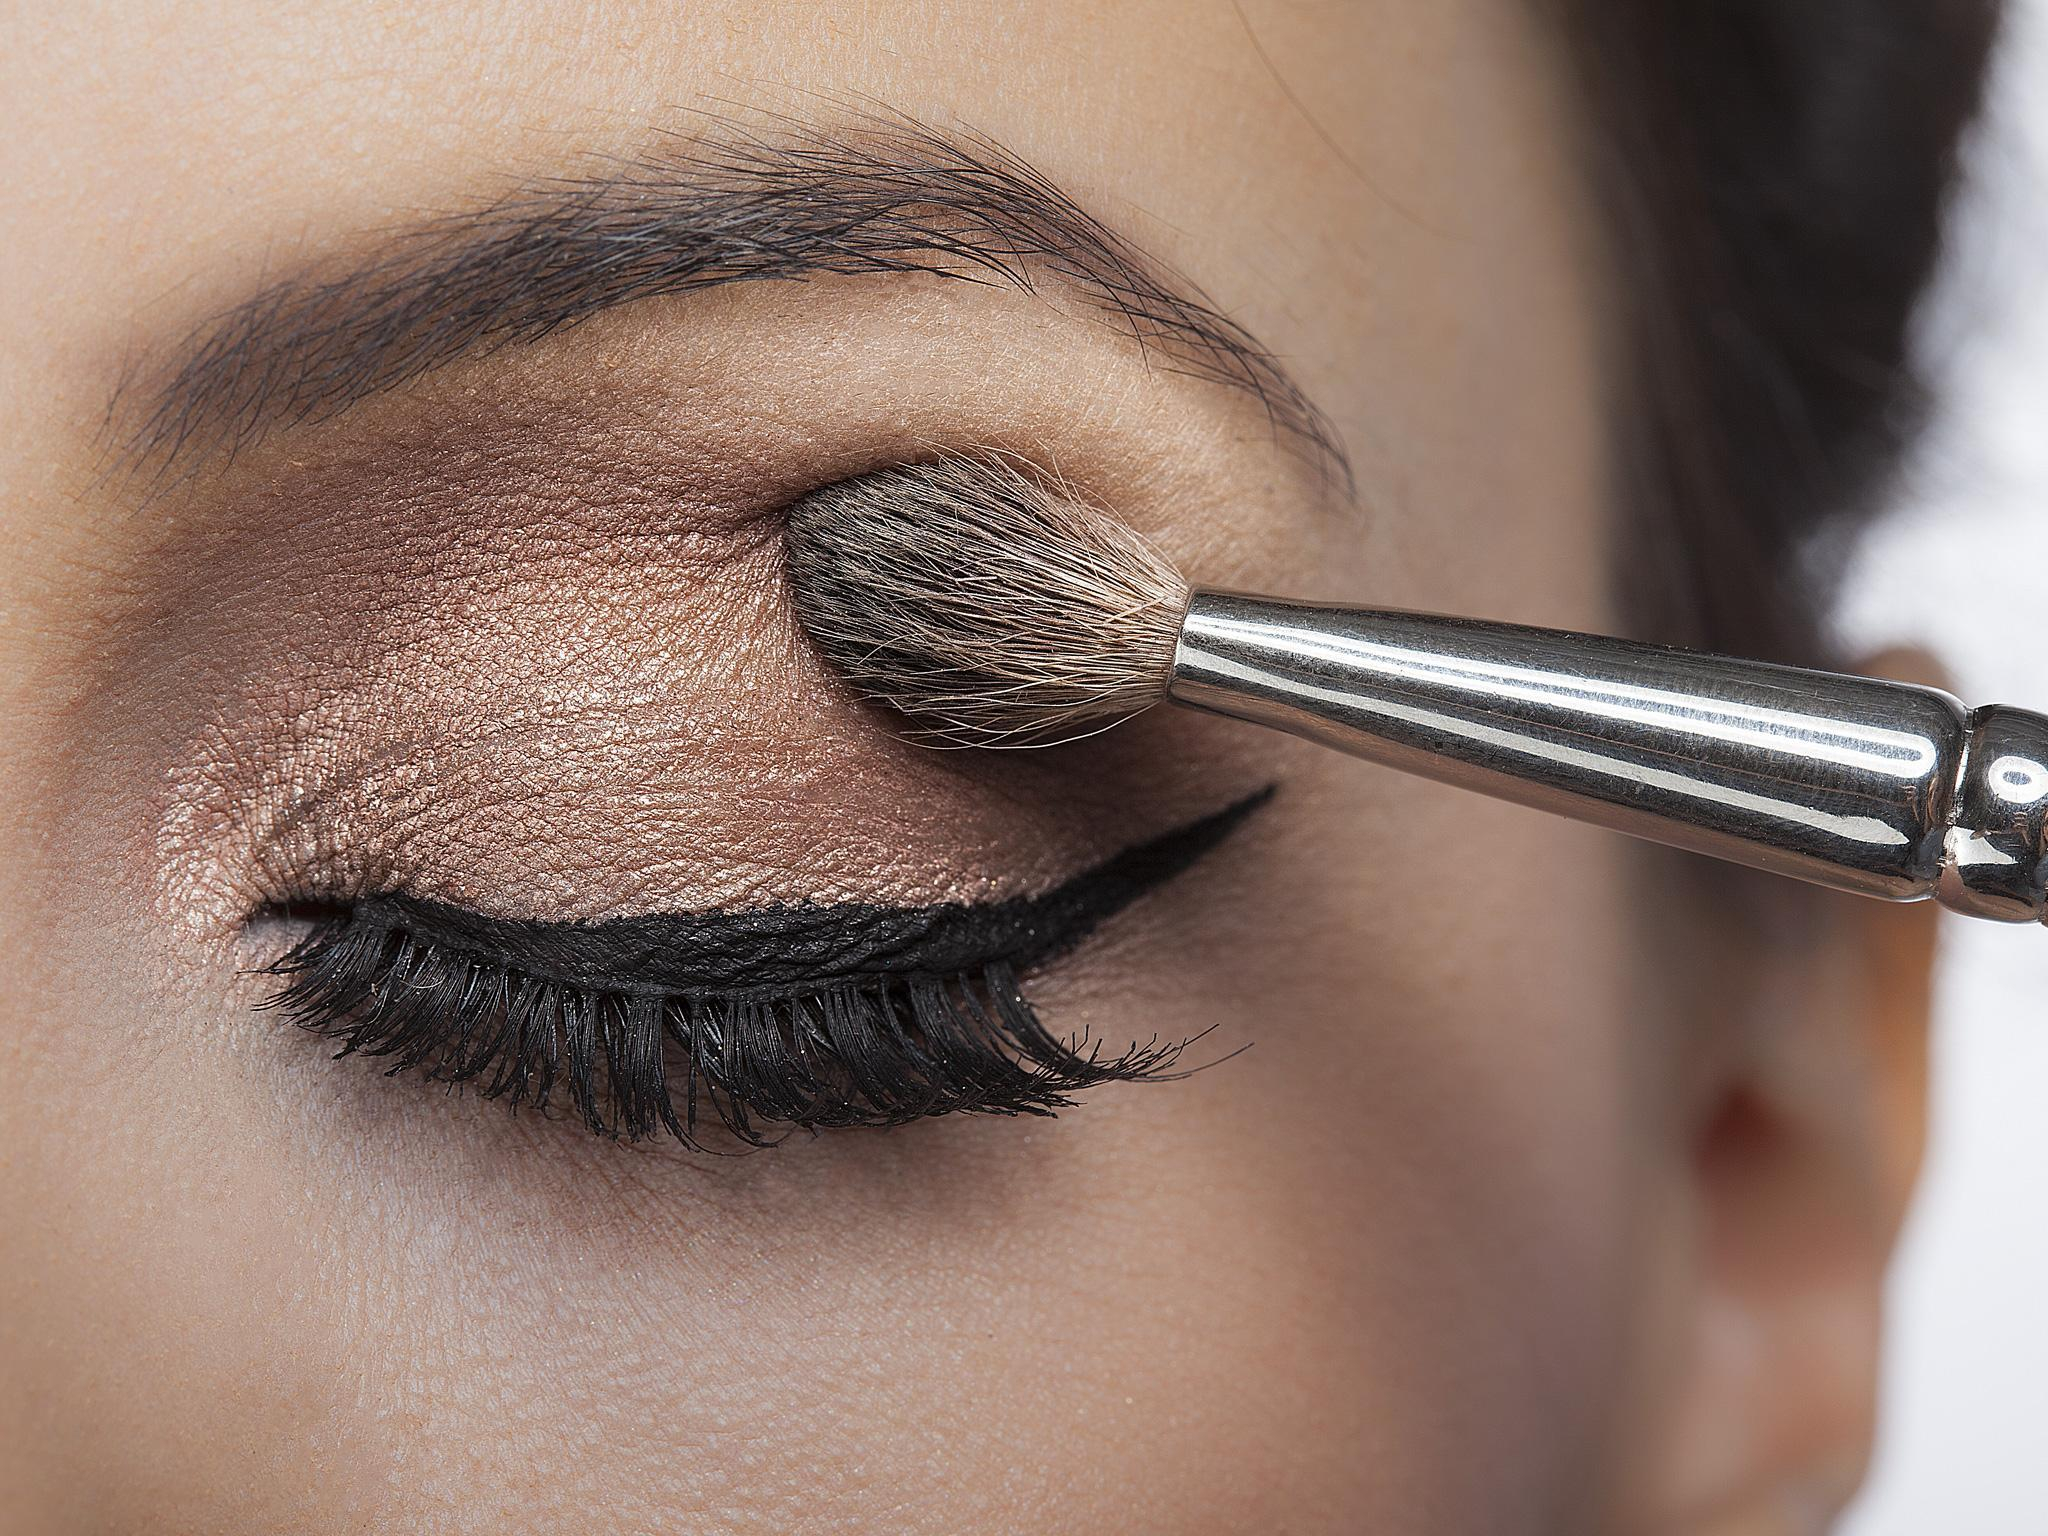 Eyeshadow Makeup For Asian Eyes 7 Best Eyeshadow Primers The Independent